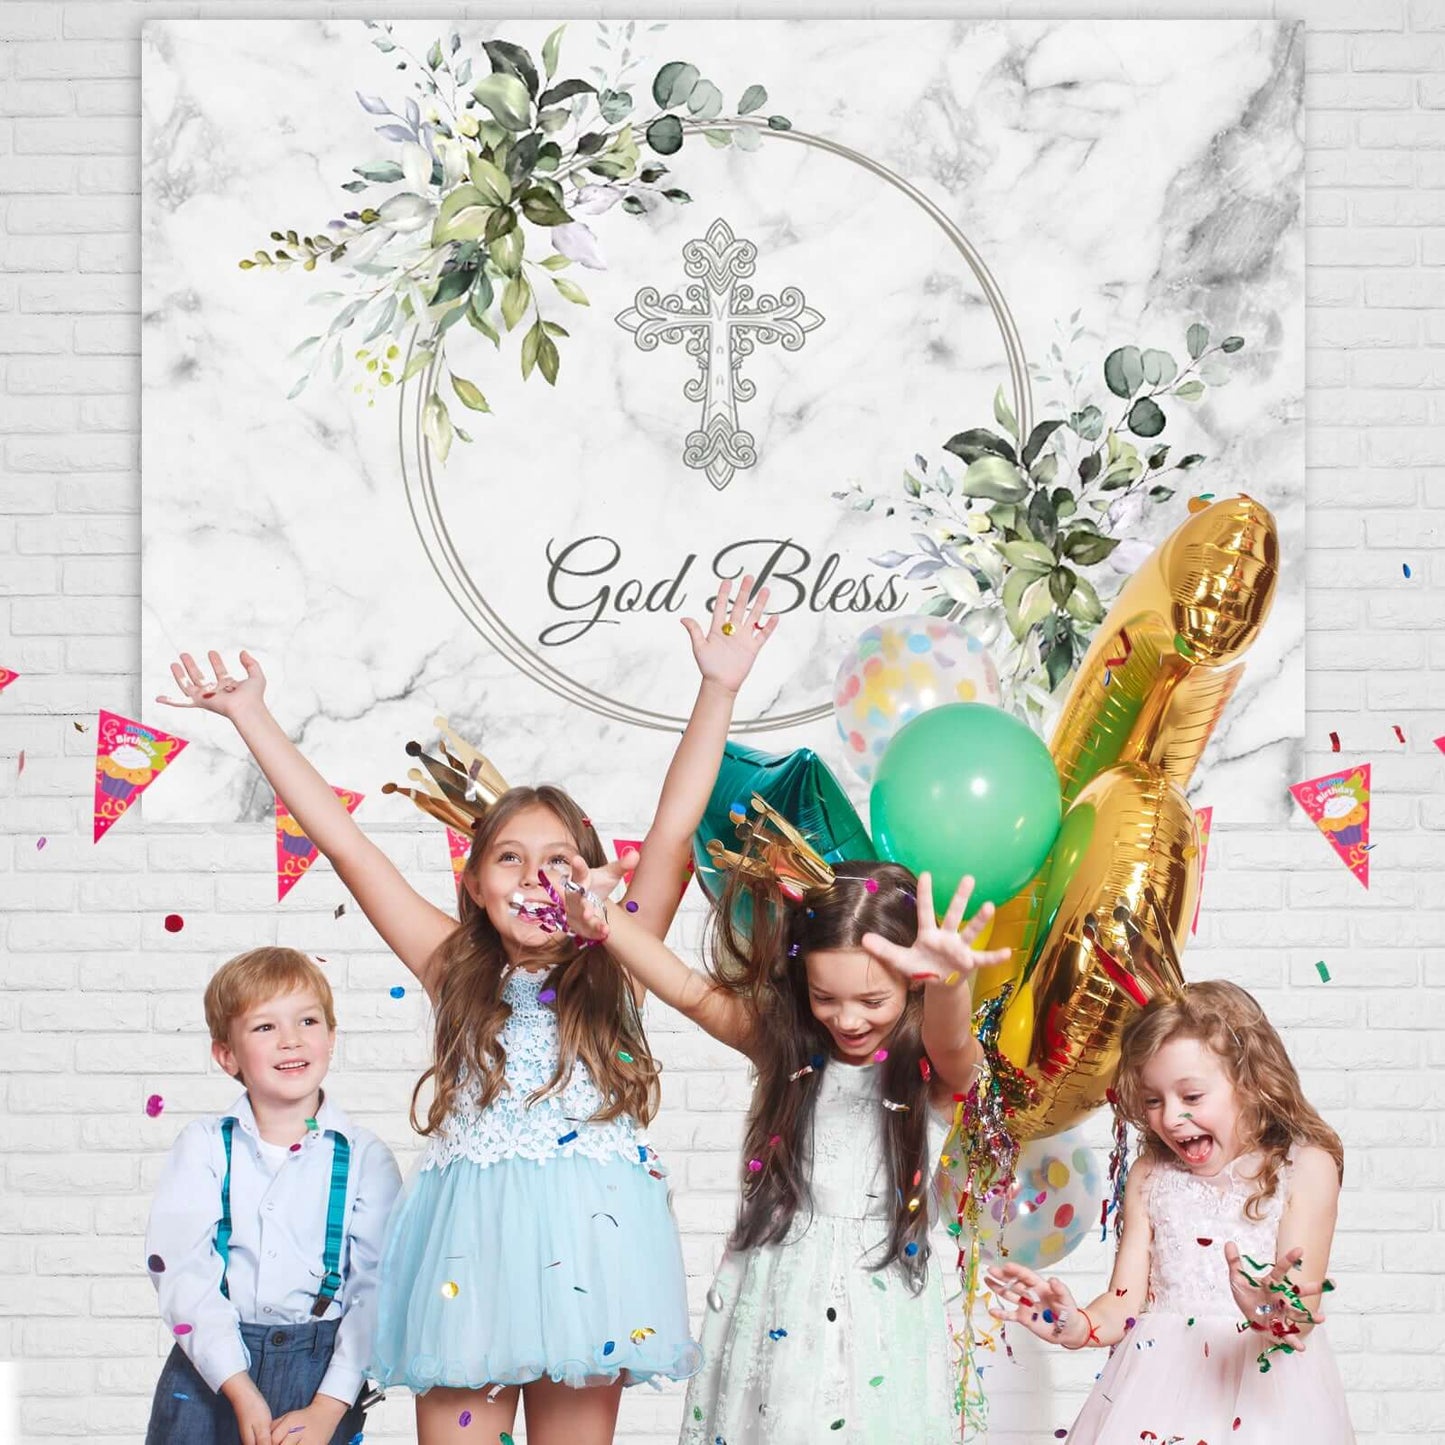 Sensfun First Holy Communion Backdrops Party Decoration Cake Table Banner Silver Cross Marble Green Leaves God Bless Photography Backgrounds